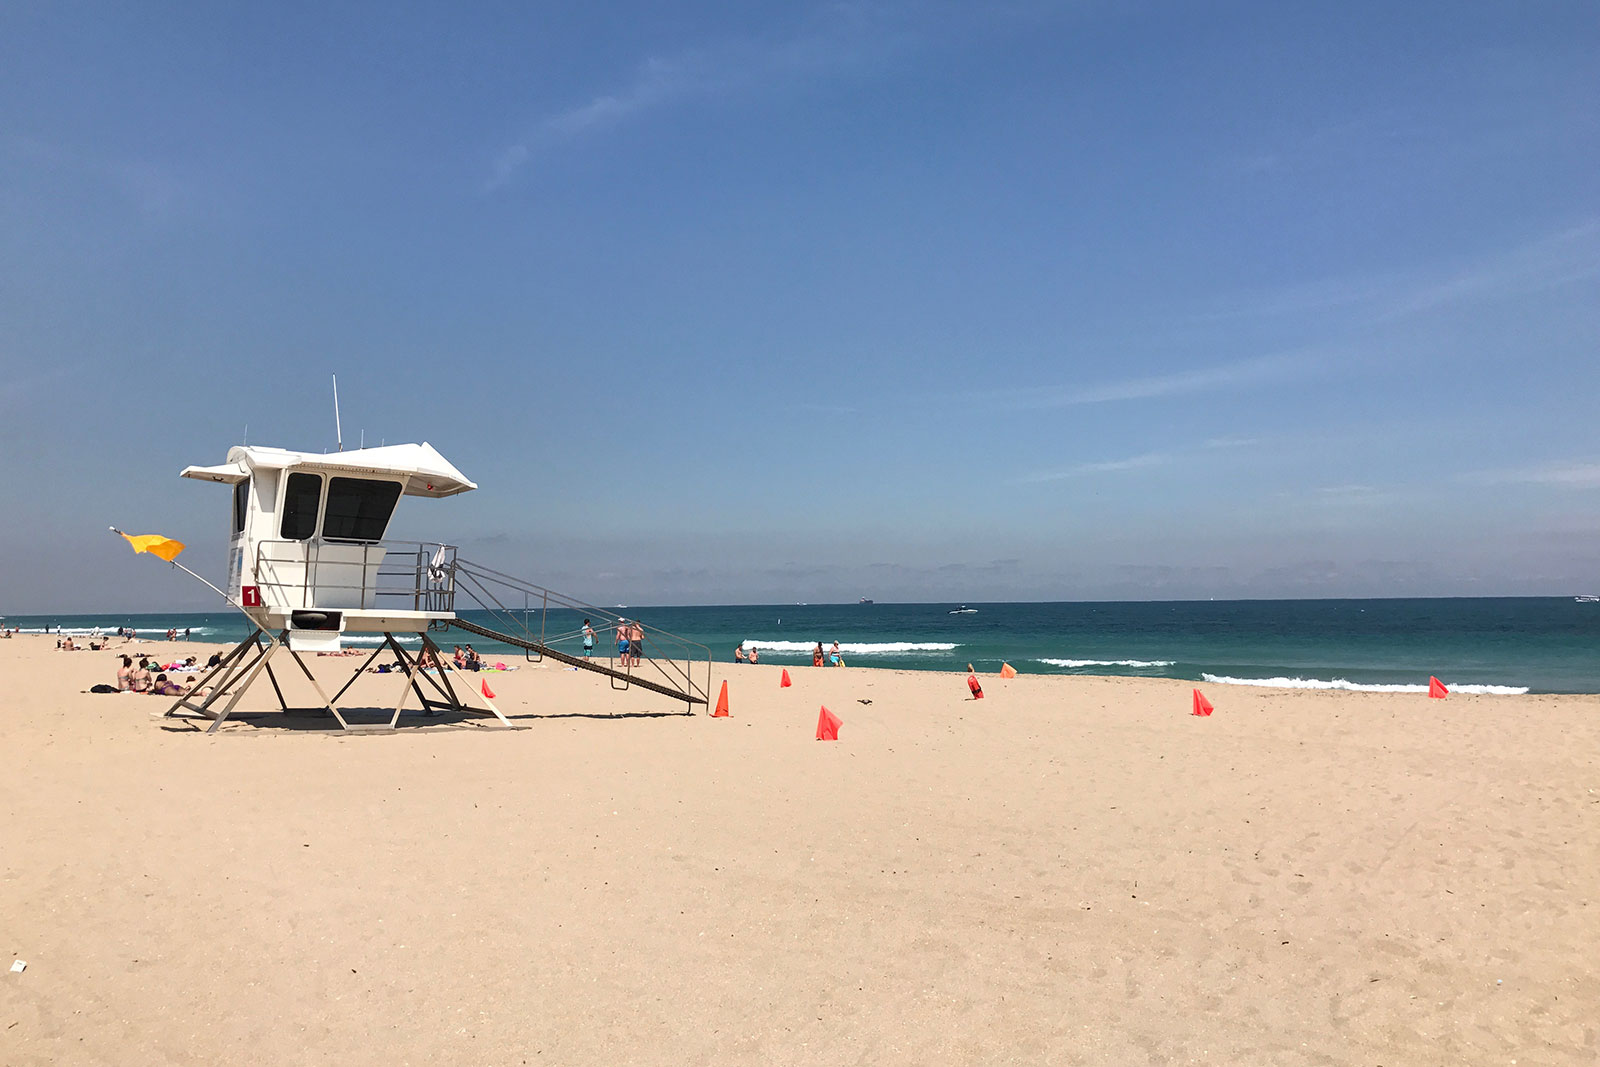 Lifeguard station at beach in Florida, USA. How to survive layovers